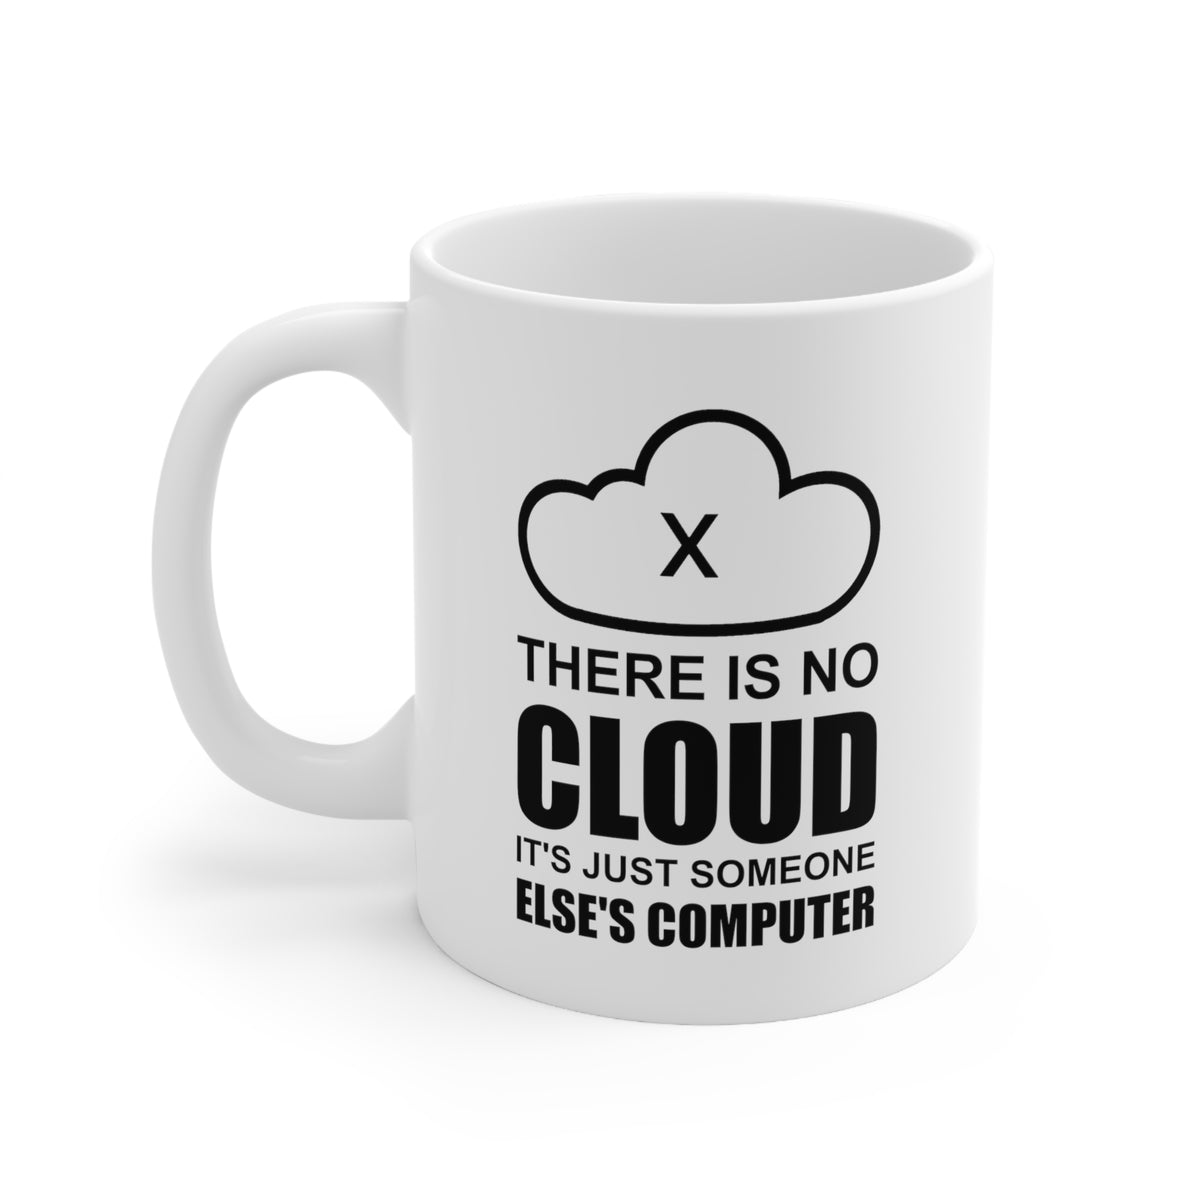 Programmer Coffee Mug - There Is No Cloud. It’s Just Someone Else’s Computer - Great And Funny Gift For Programmer